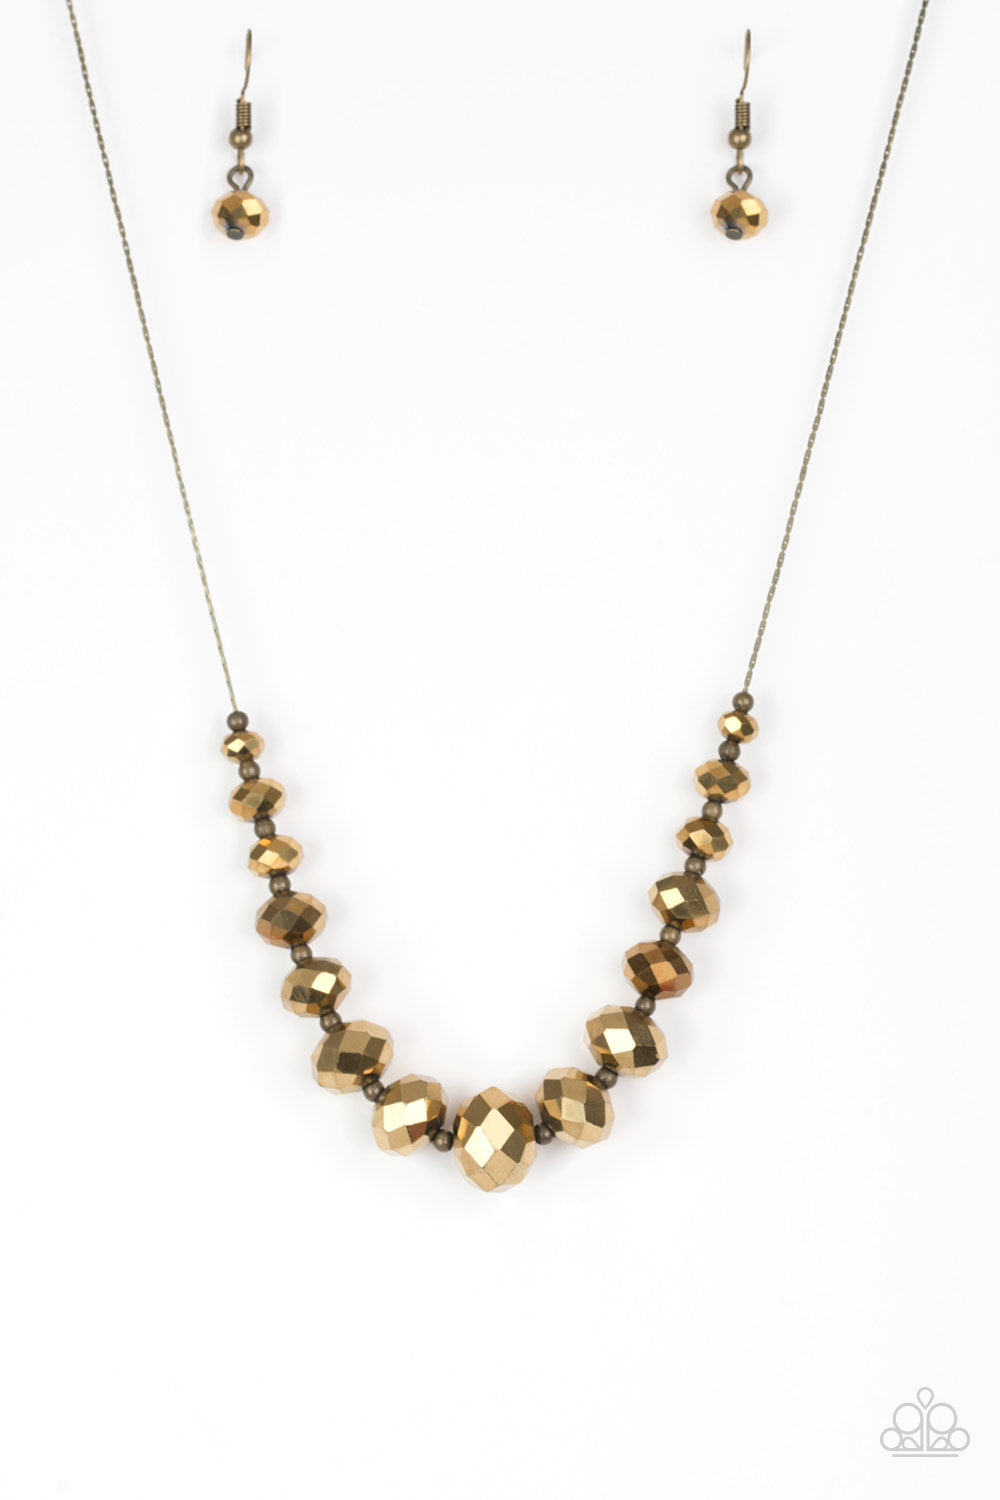 Paparazzi ♥ Crystal Carriages Brass Necklace – - ♥ LisaAbercrombie